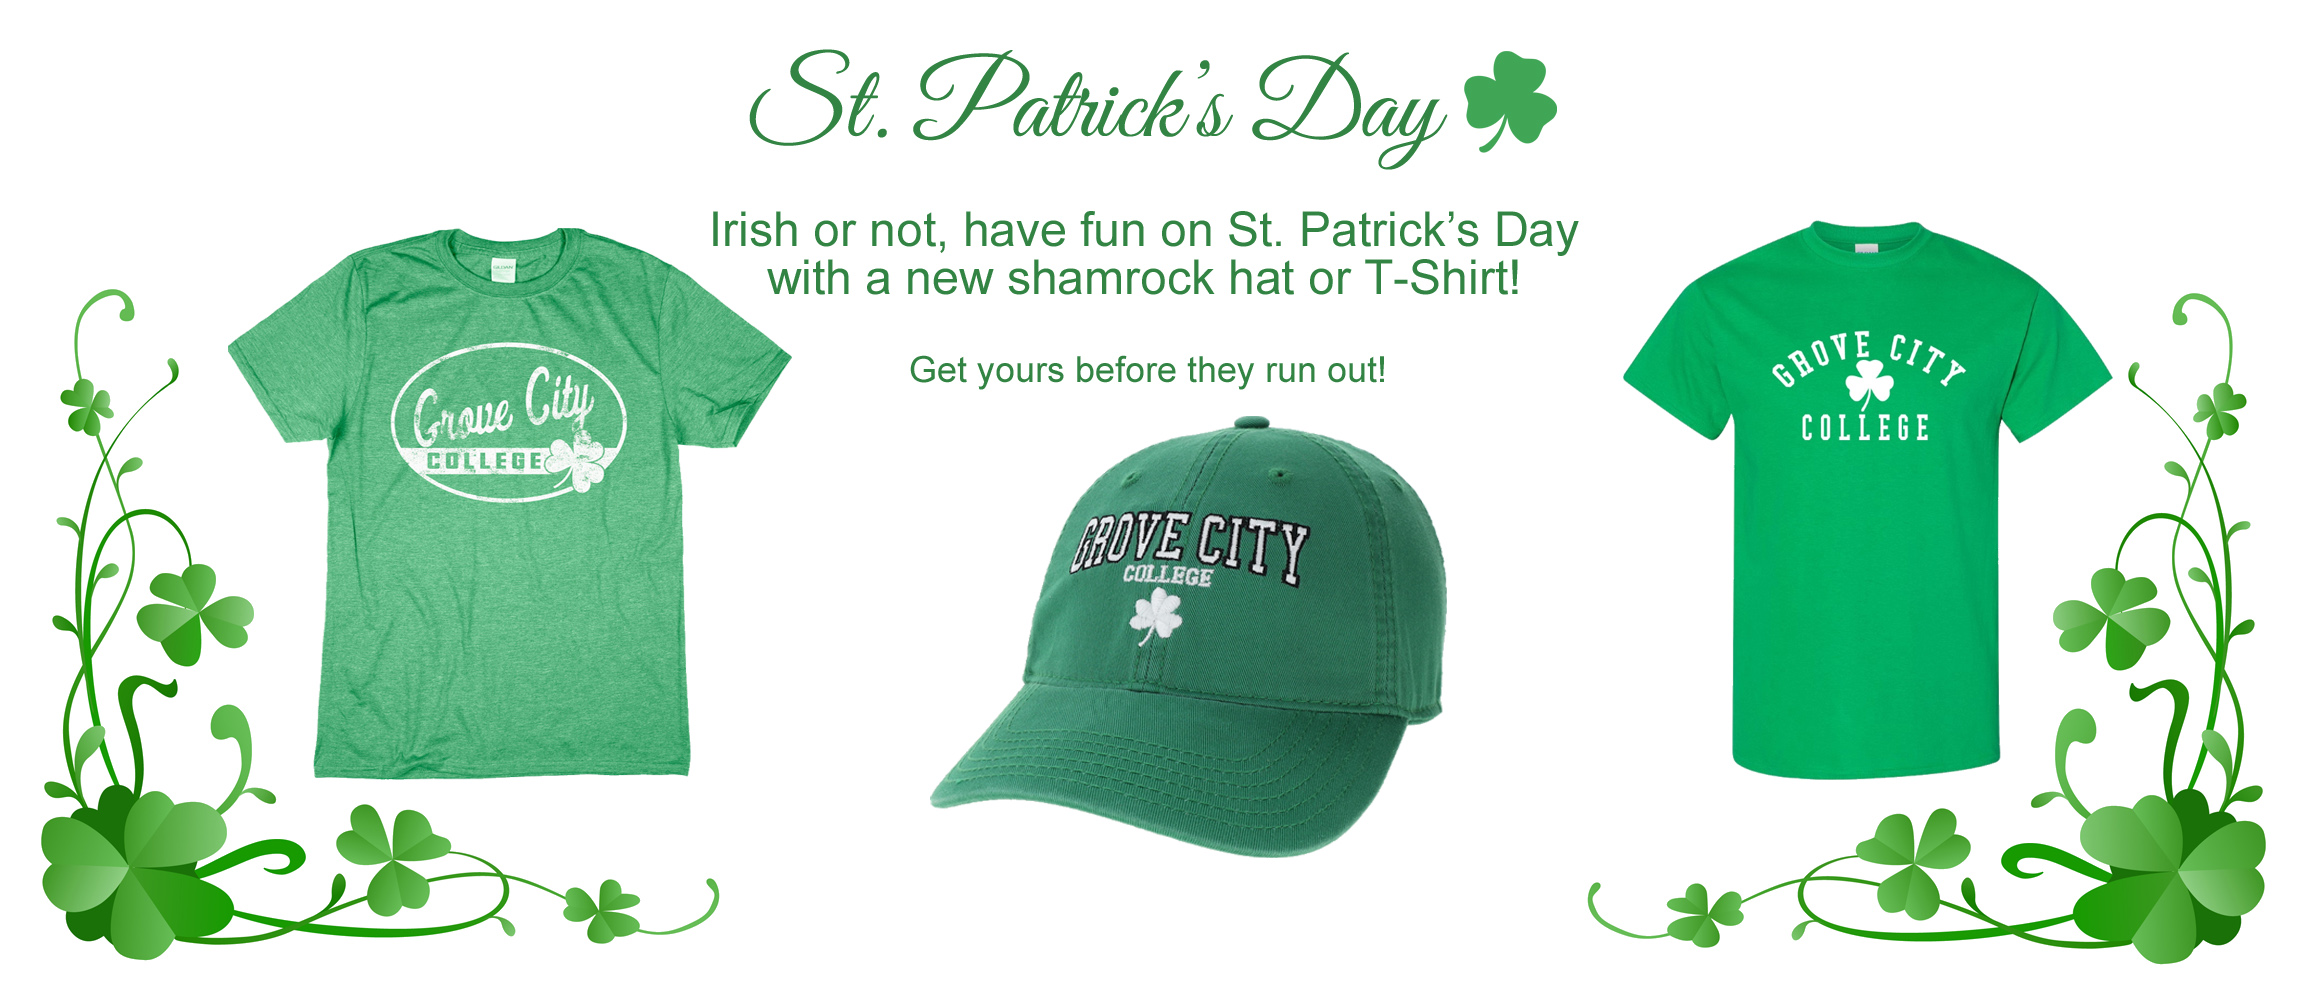 St. Patrick's Day. Order your T-shirt now